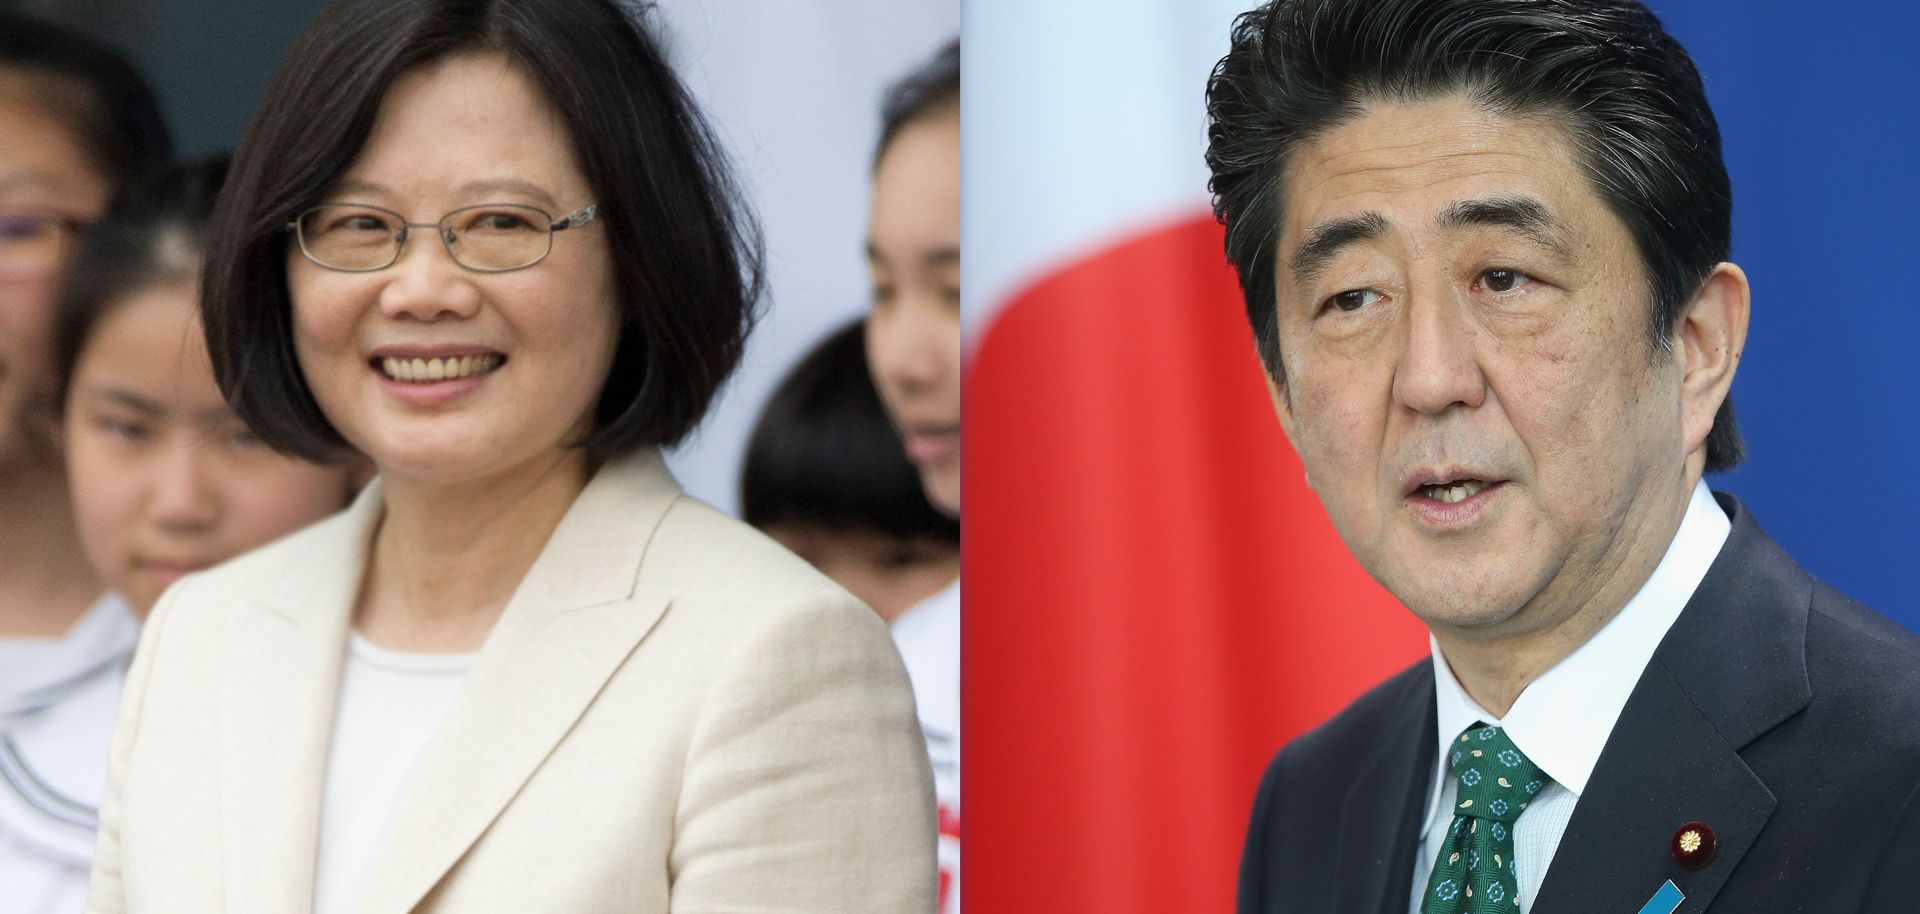 In a Few Words, Taiwan Finds an Ally